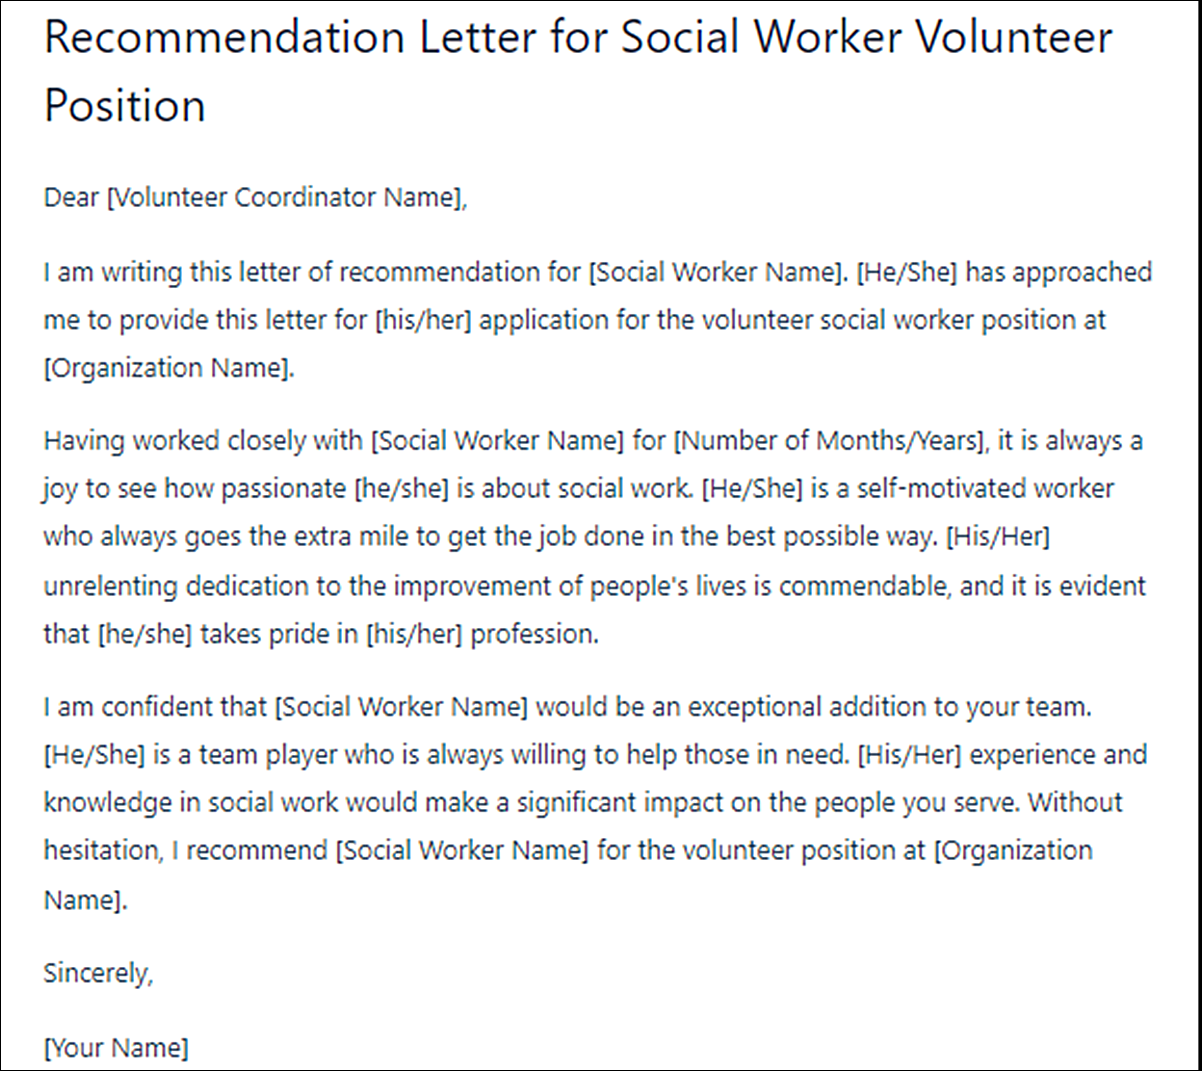 Letter of Recommendation Template for Social Worker